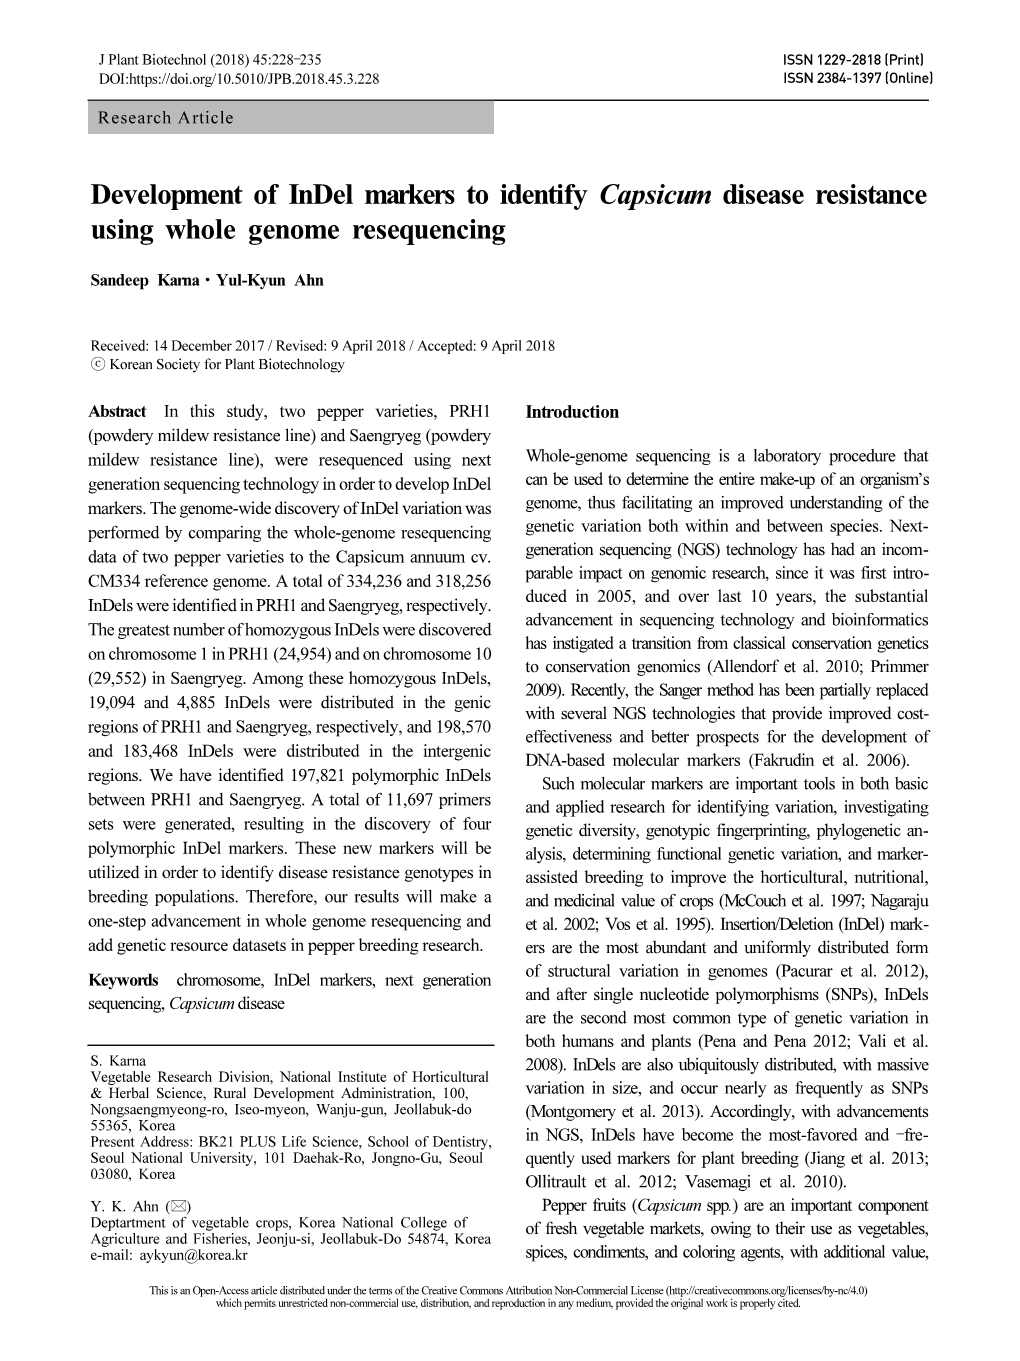 Development of Indel Markers to Identify Capsicum Disease Resistance Using Whole Genome Resequencing